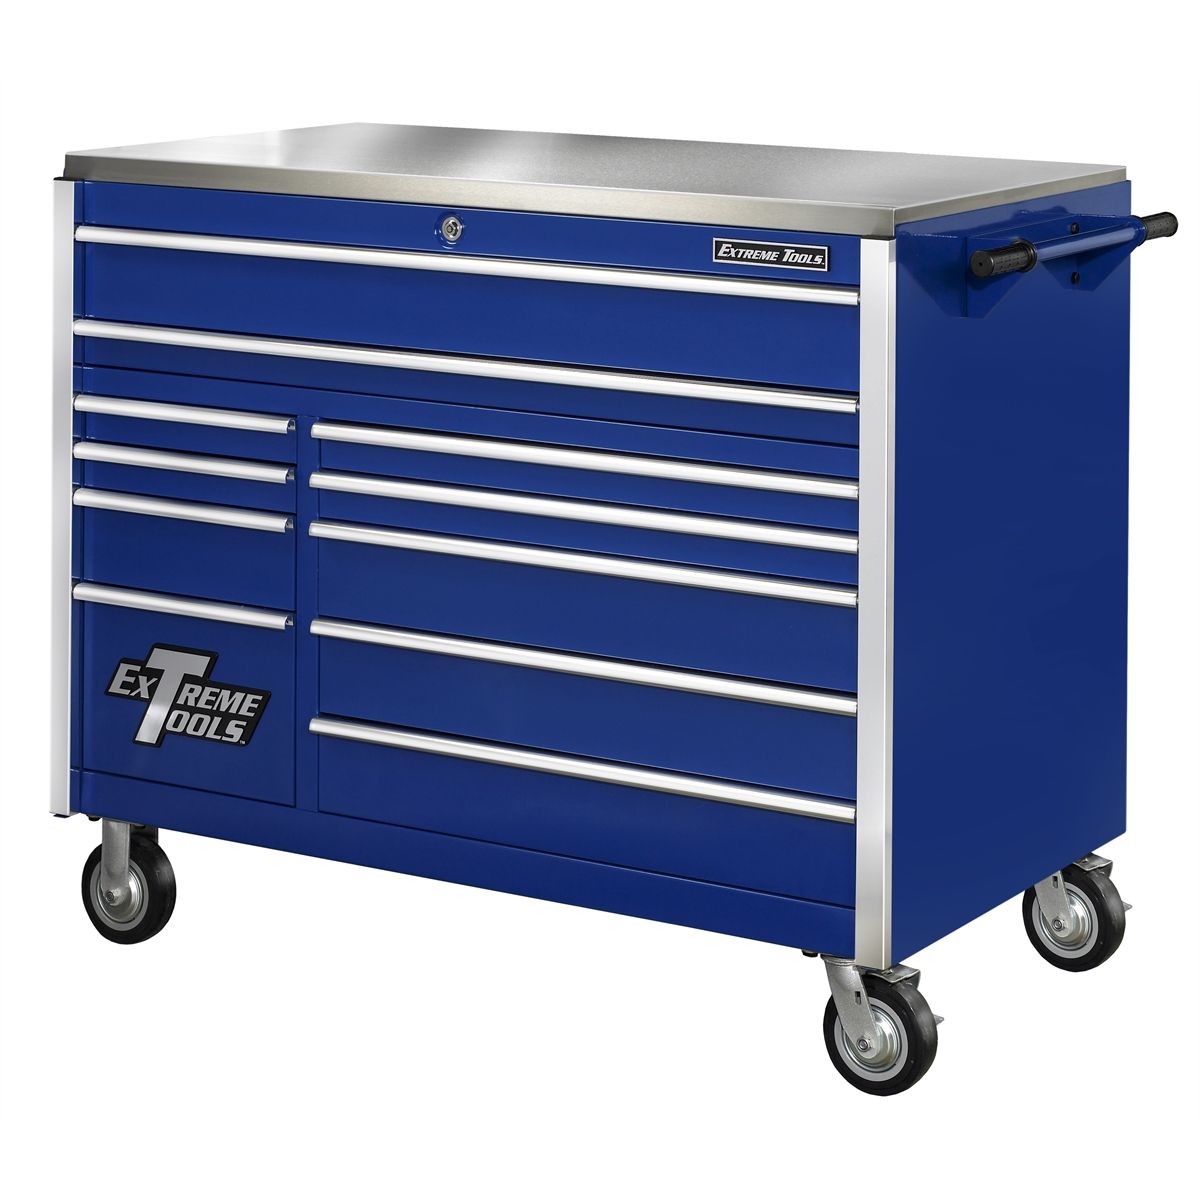 55 Inch 11 Drawer Professional Roller Cabinet in Blue